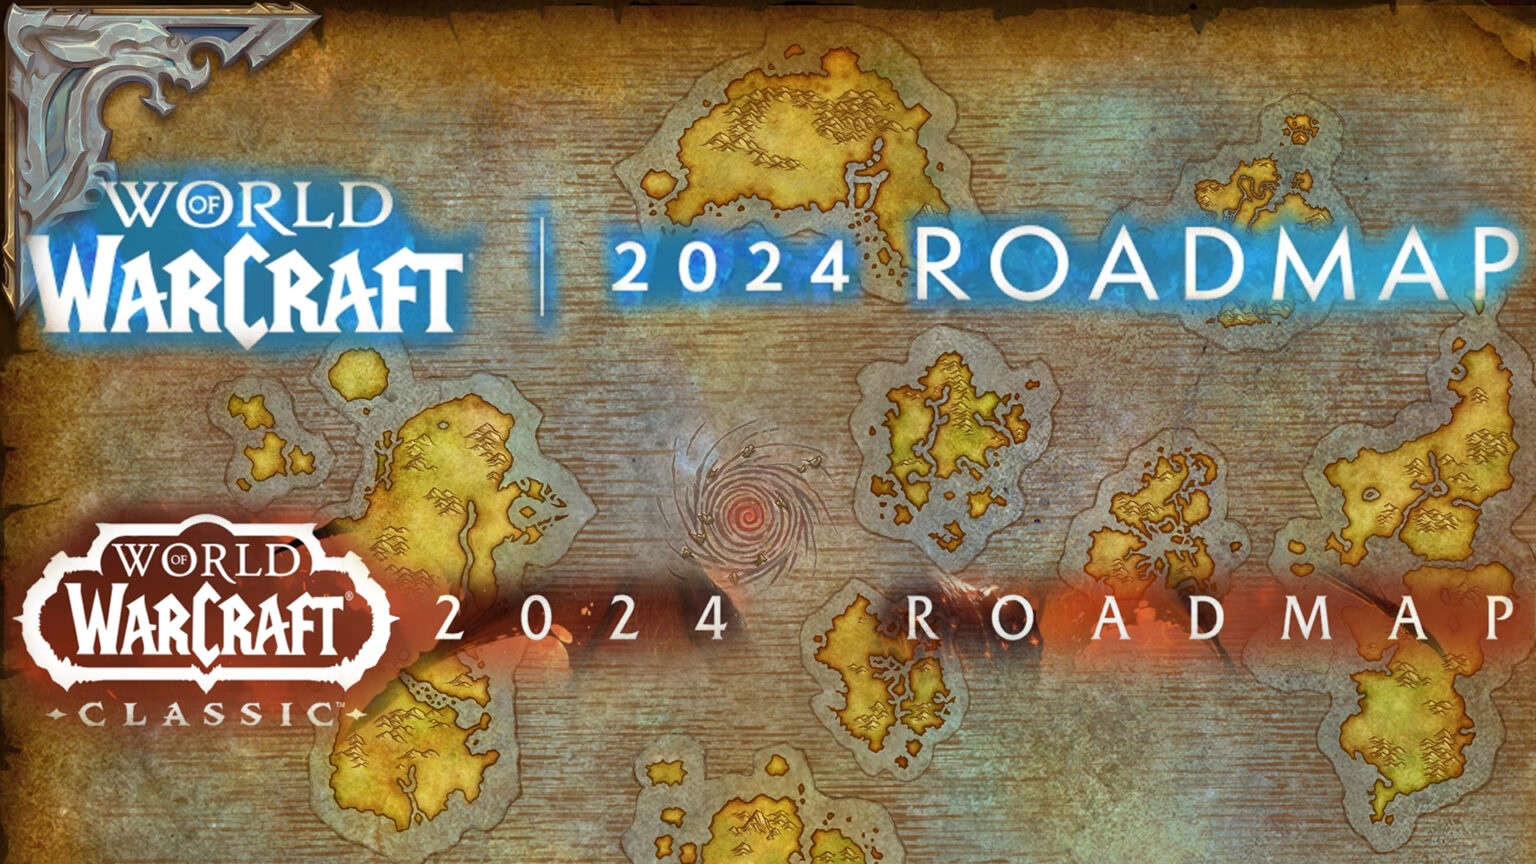 Blizzard Released 2024 Roadmap For World of Warcraft & WoW Classic